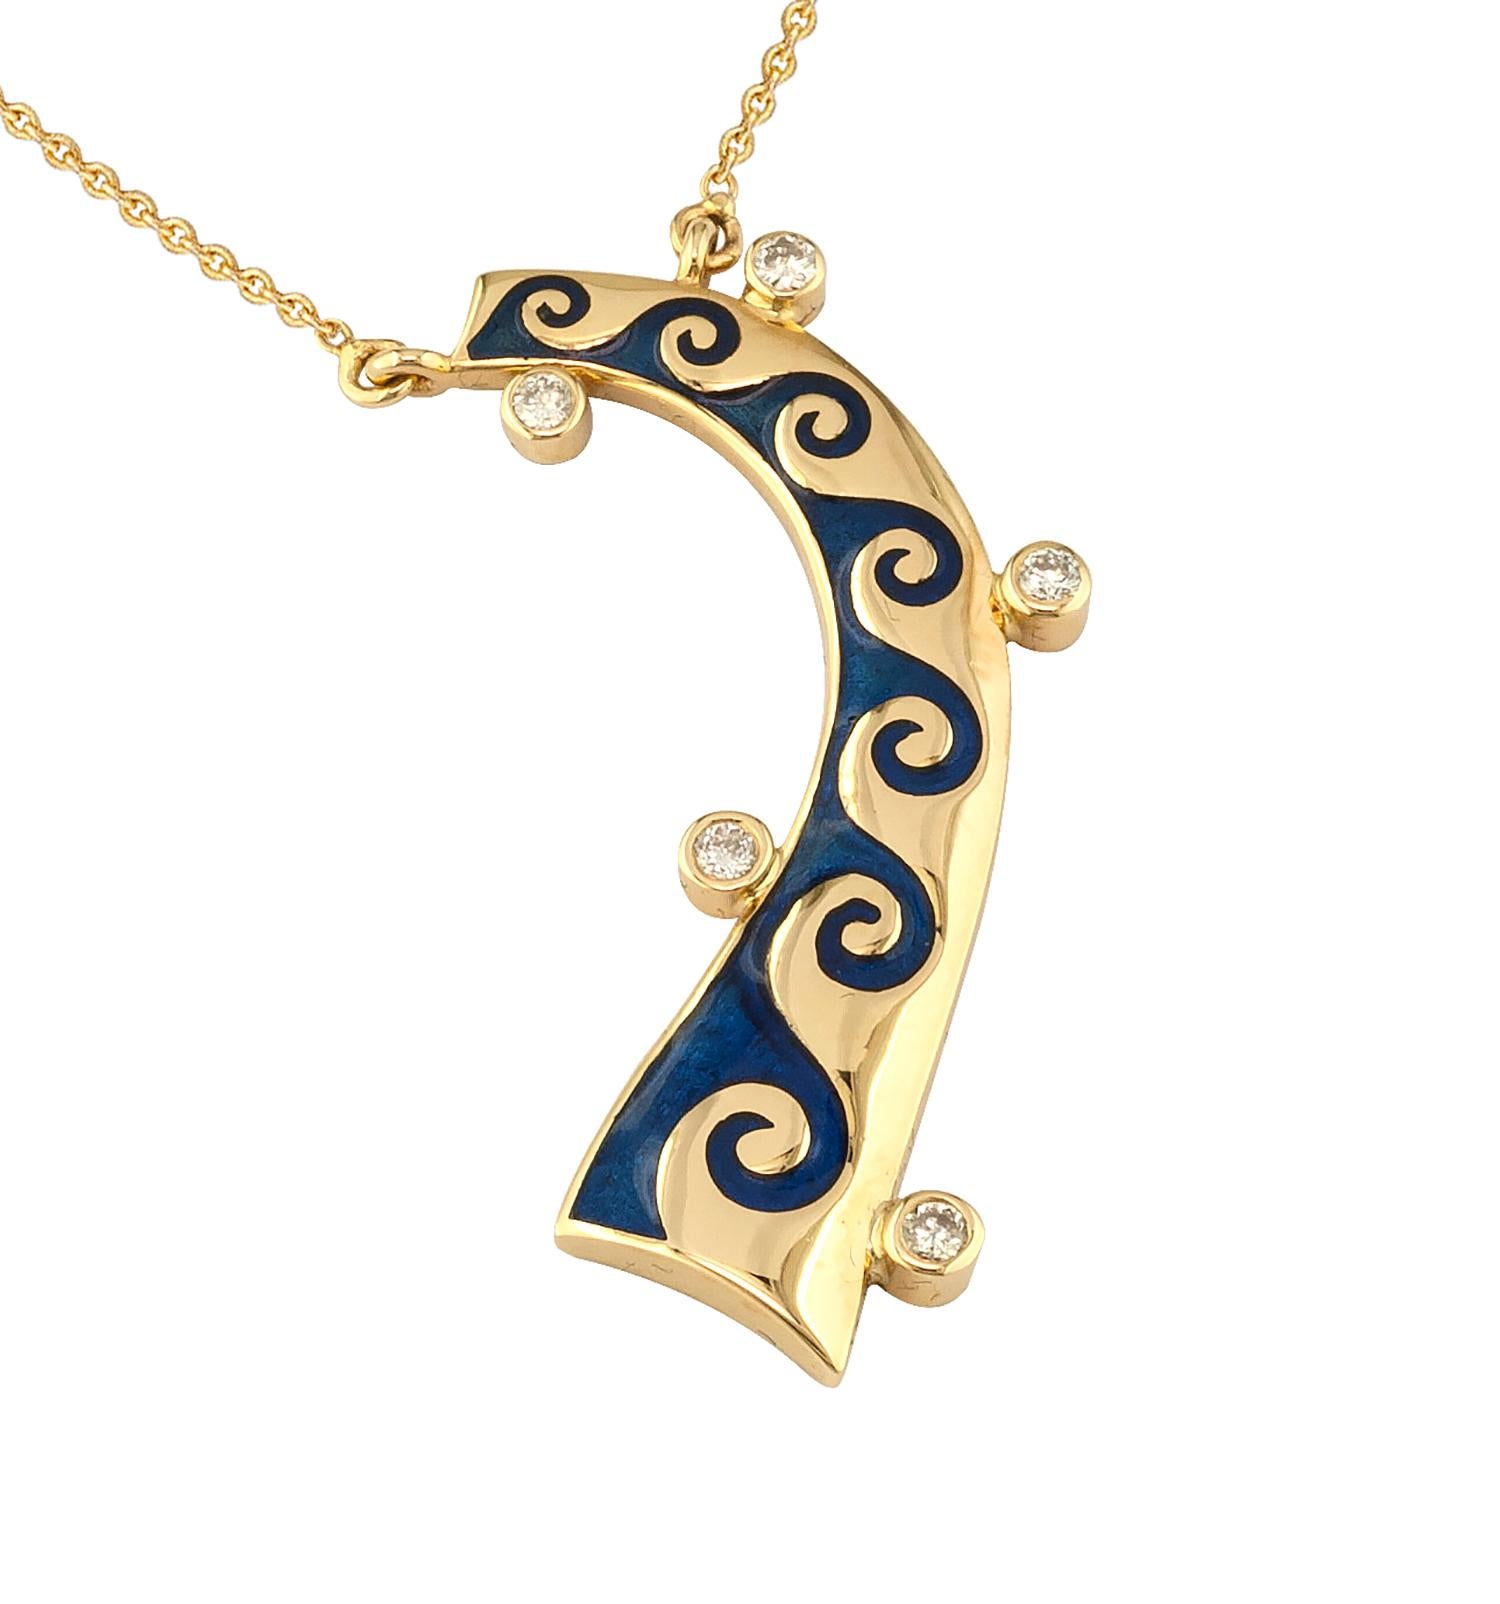 S.Georgios designer pendant necklace is handmade from solid 18 Karat Yellow Gold and features a unique Blue Enamel inlay workmanship creating a striking wave pattern. This stunning pendant features 5 brilliant-cut White Diamonds total weight of 0.10